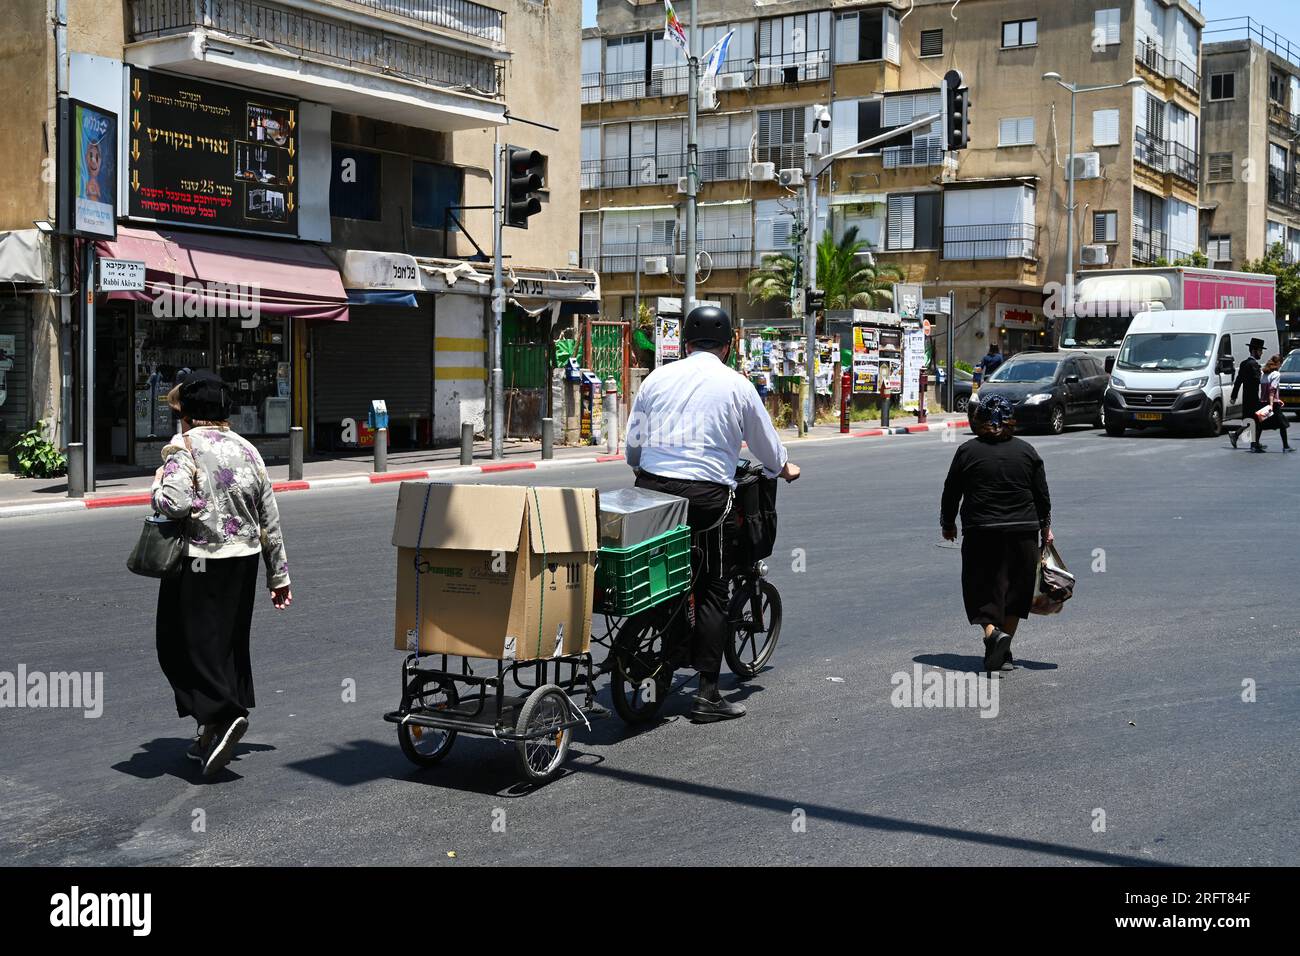 Chasidic man on bicycle with trailer Stock Photo